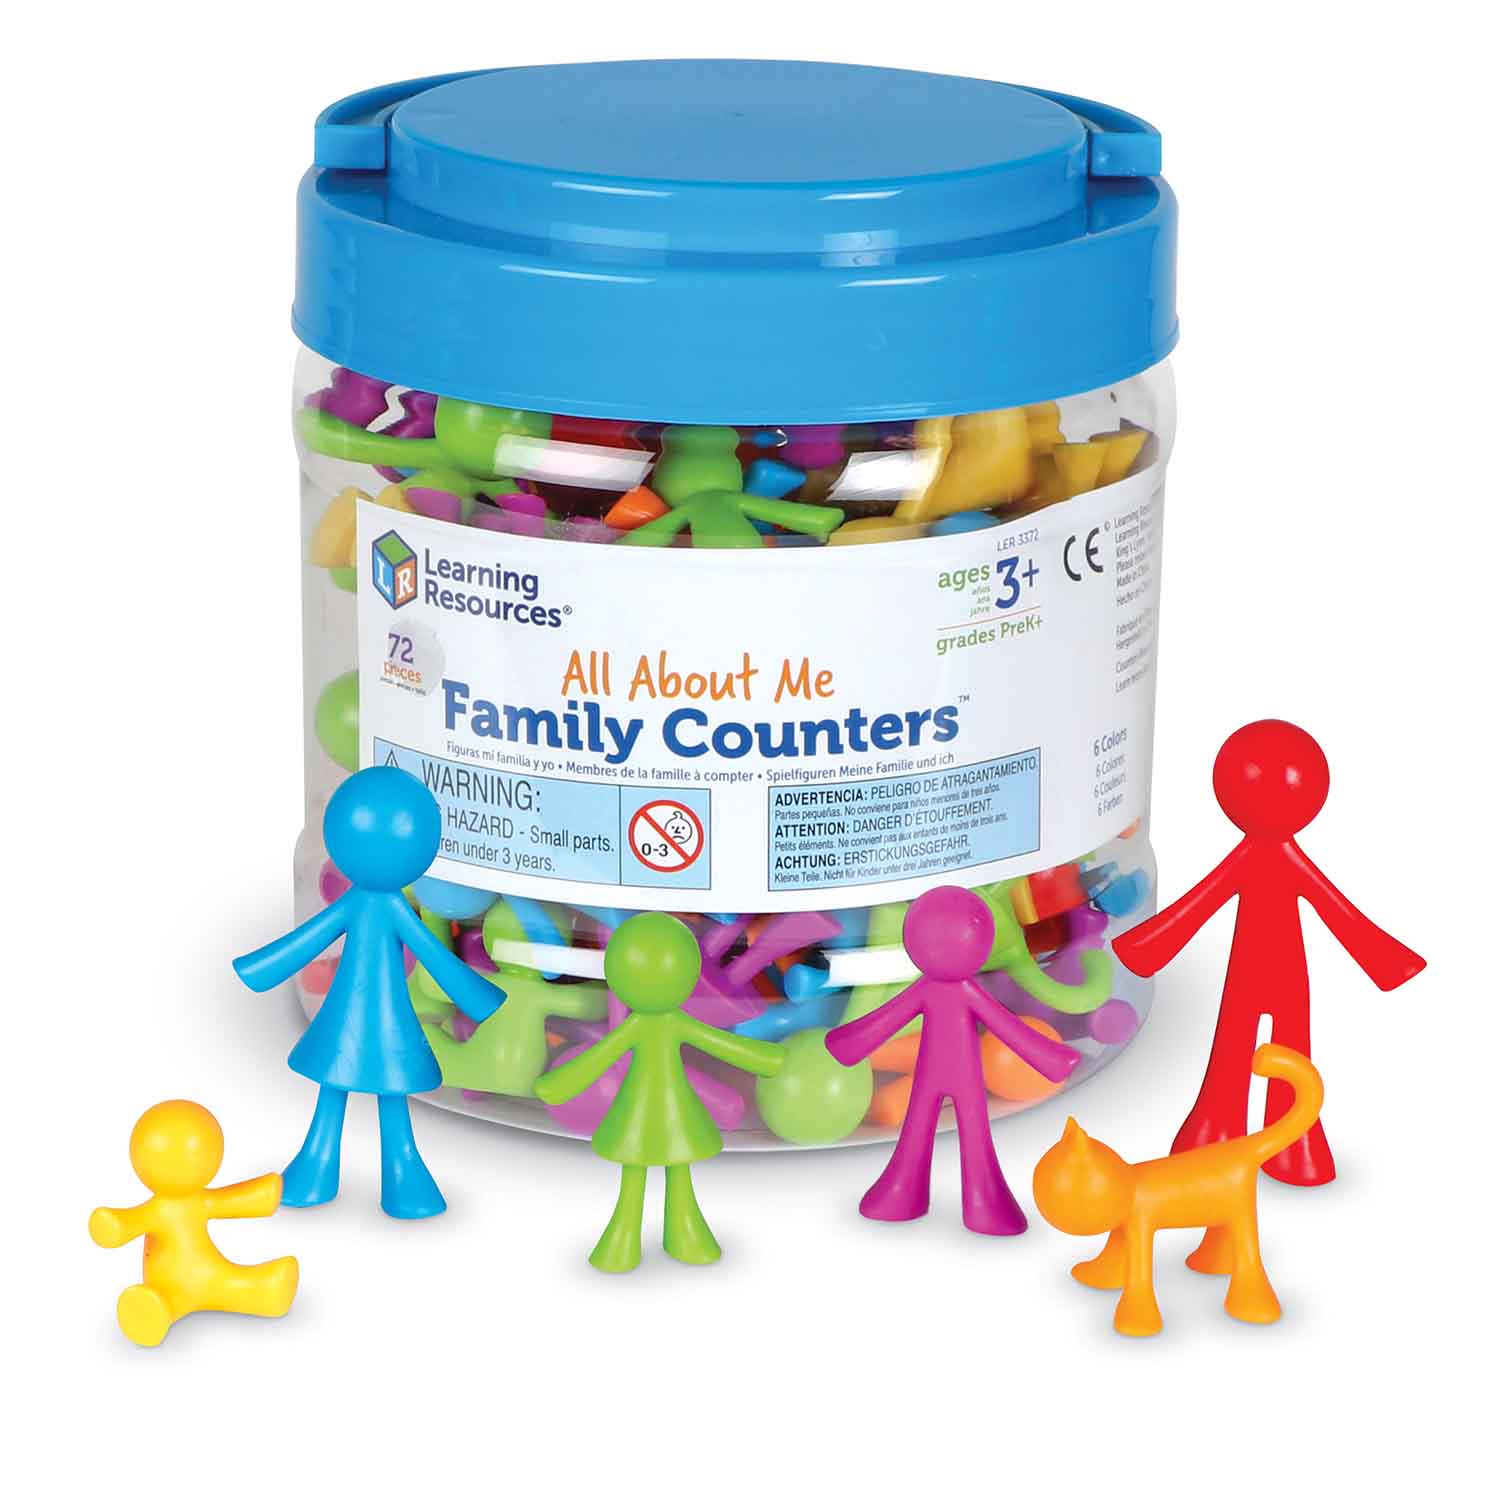 All About Me Family Counters